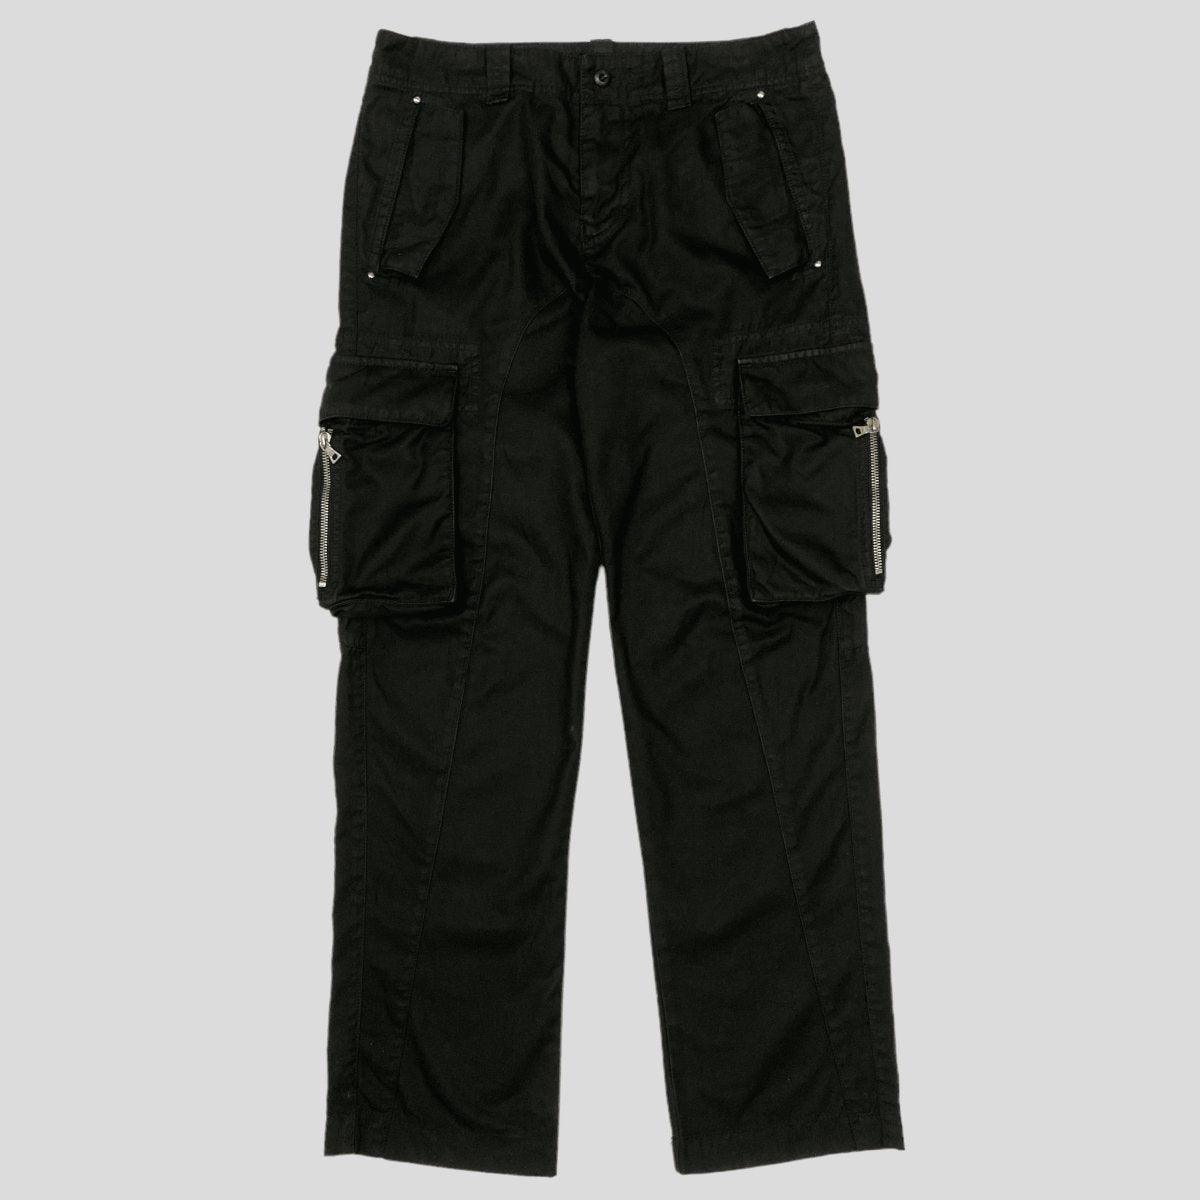 00’s Exposed Metal Zipper Panelled Cargo’s - 32 - Known Source